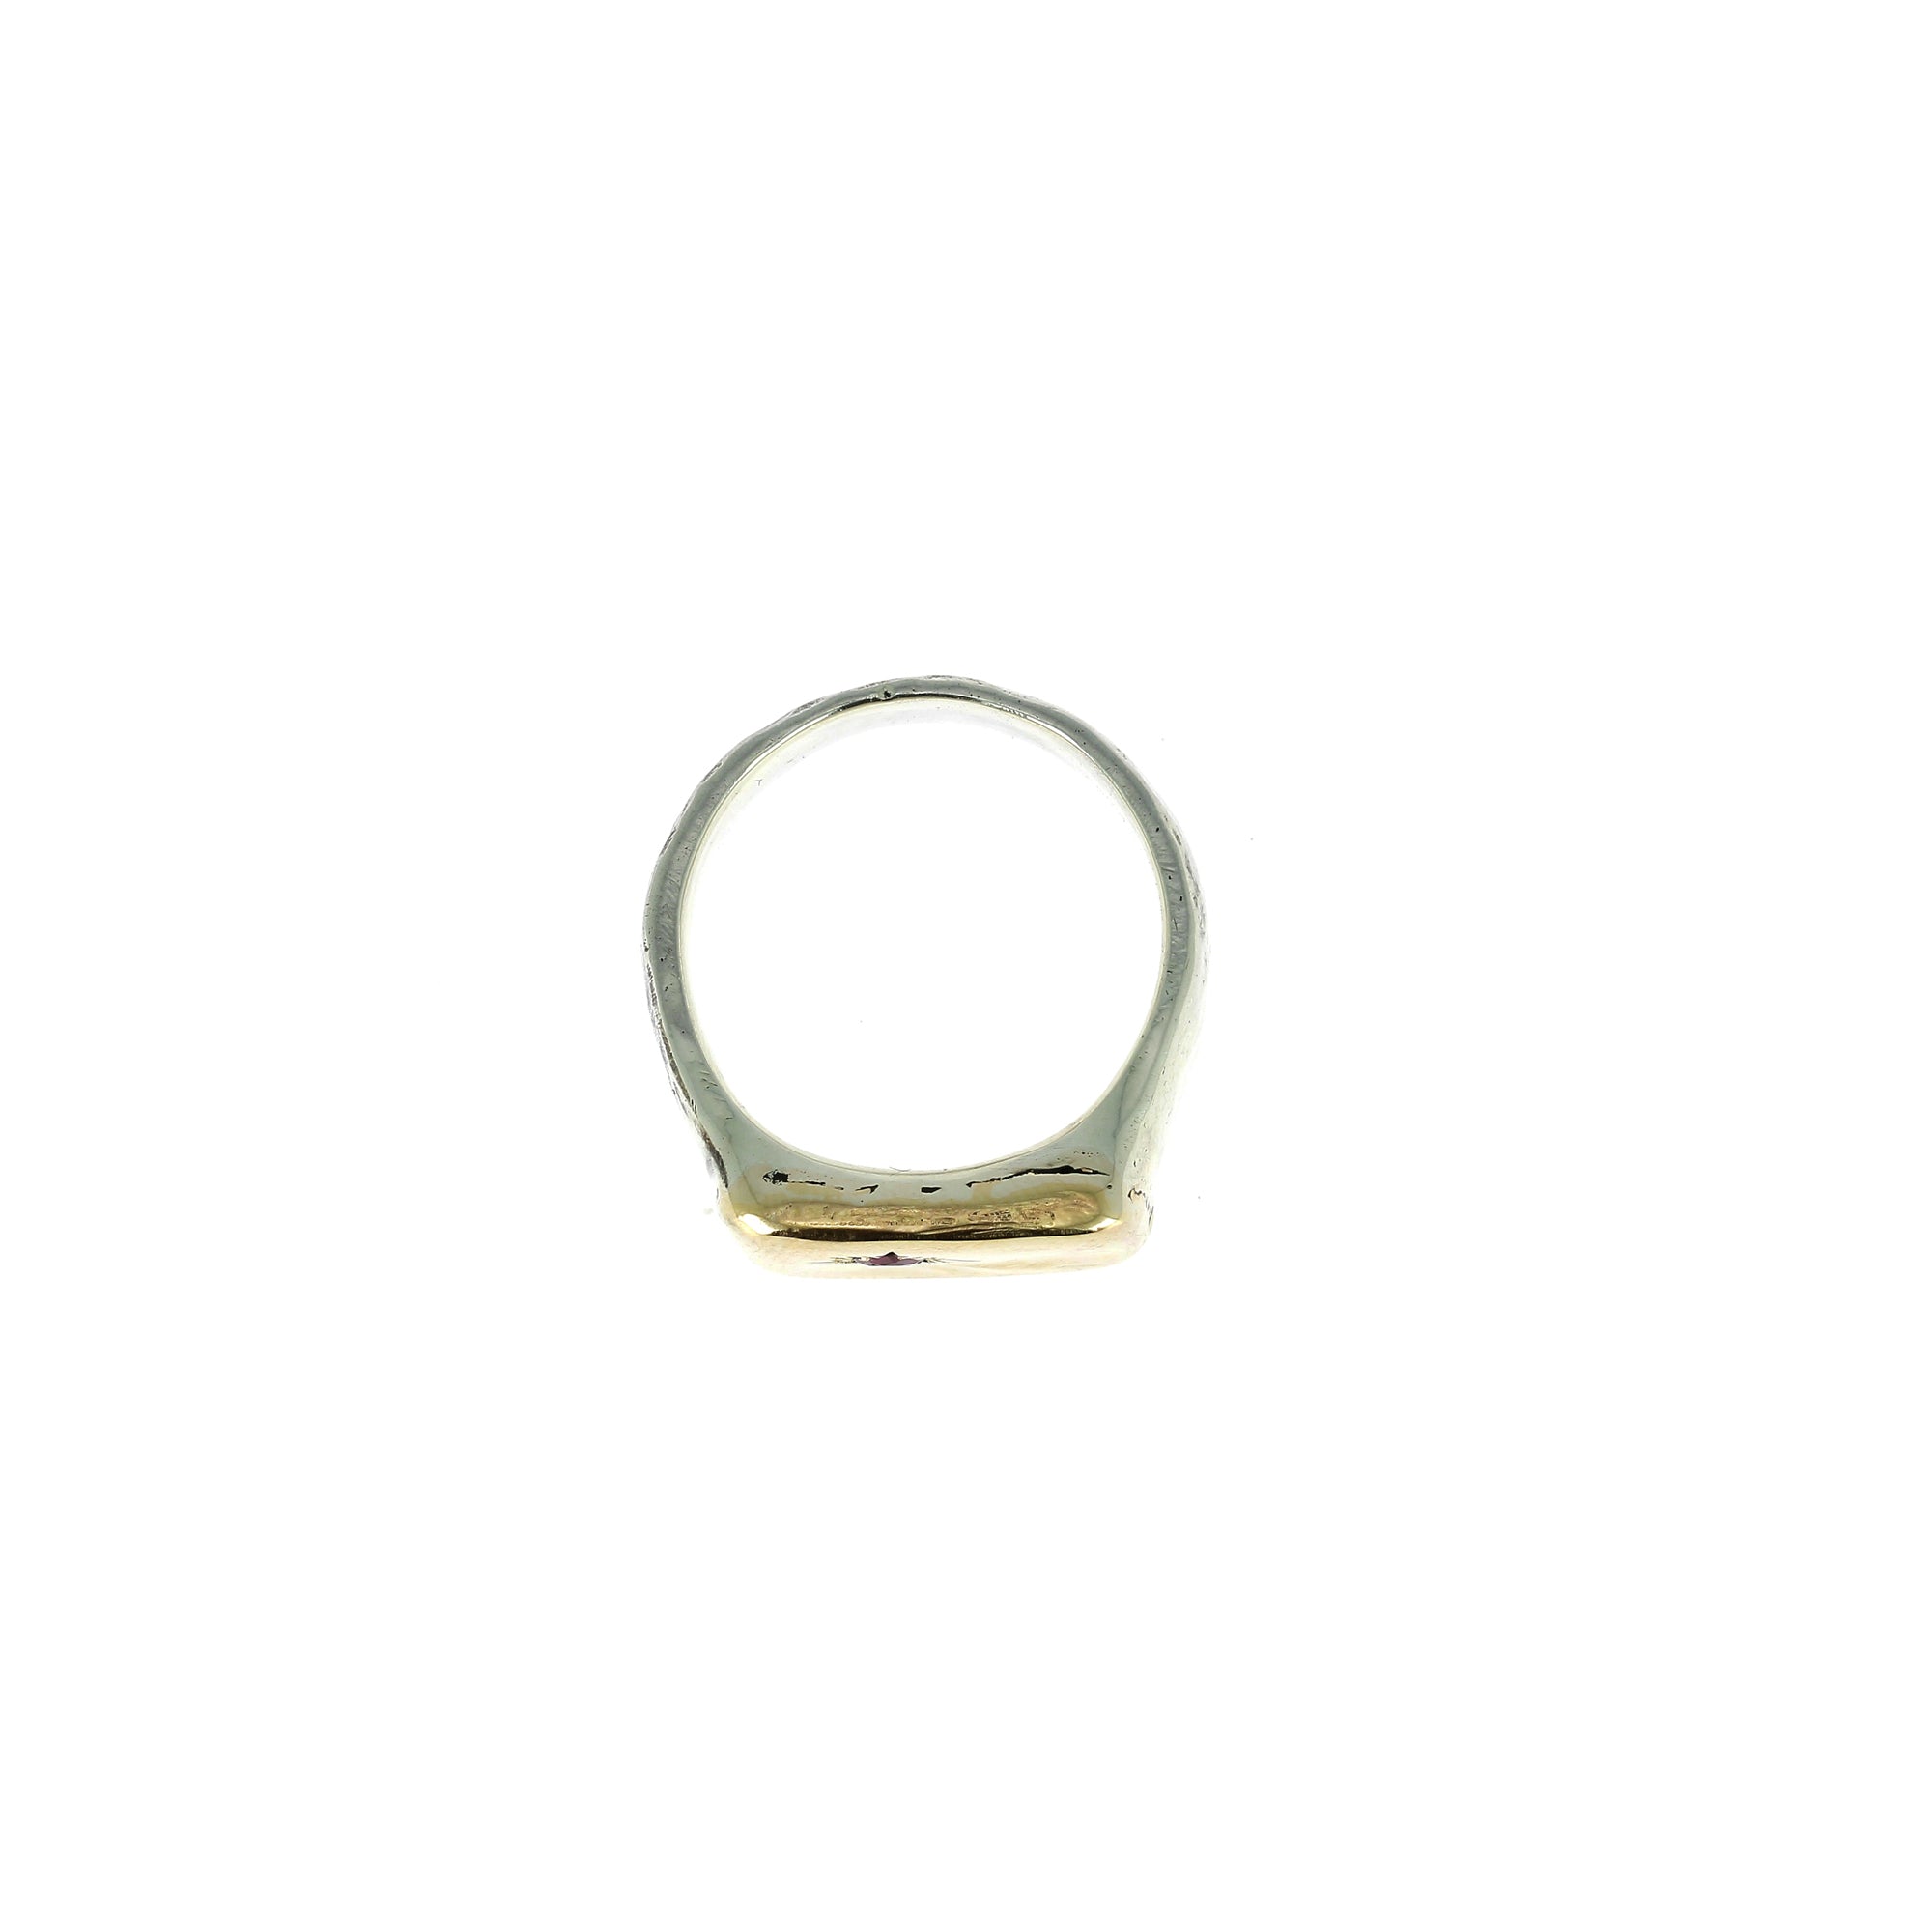 Gold and Ruby Hammered Signet Ring